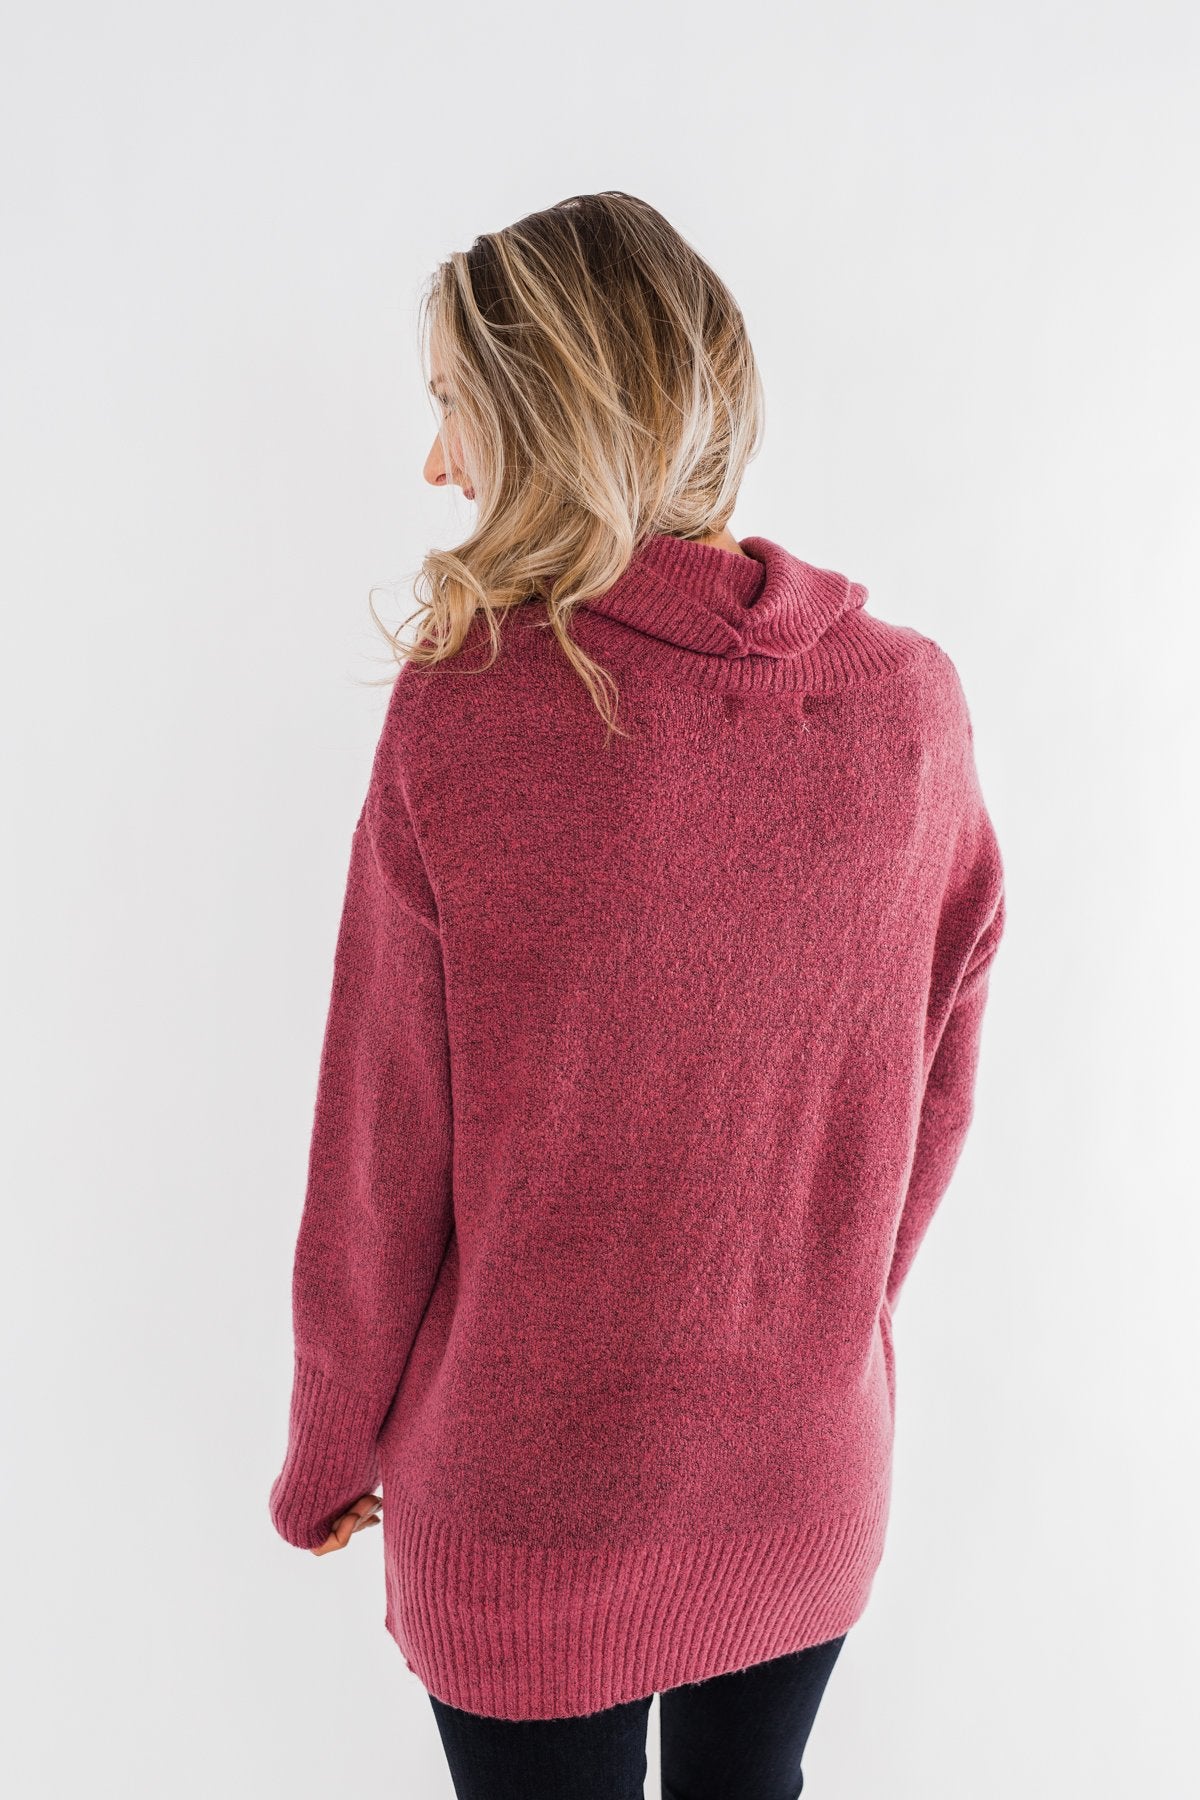 Counting Every Blessing Sweater- Dark Mauve Purple